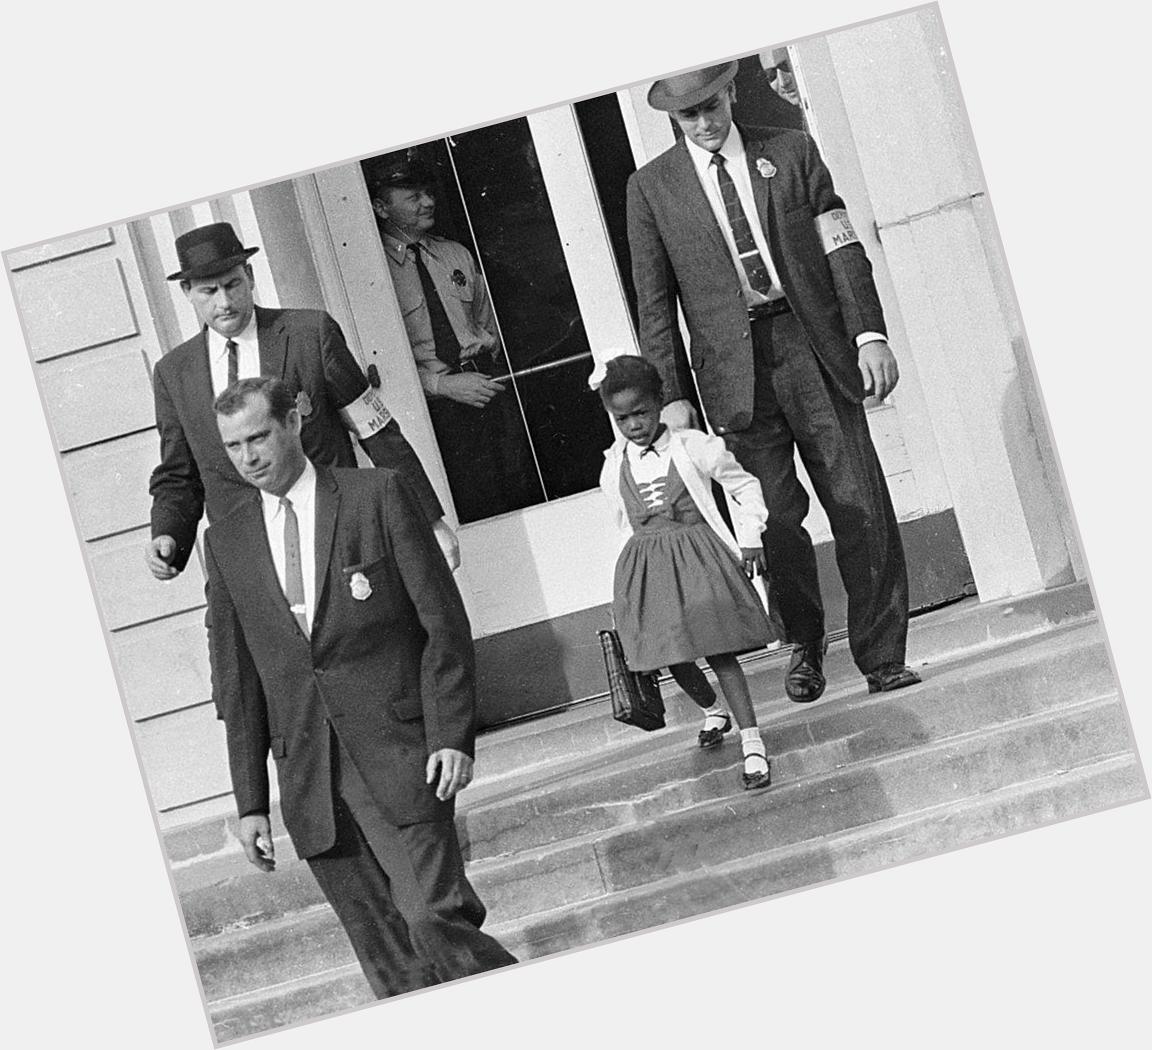 A Mighty Girl wishes Ruby Bridges, Civil Rights hero, a happy 61st birthday!  